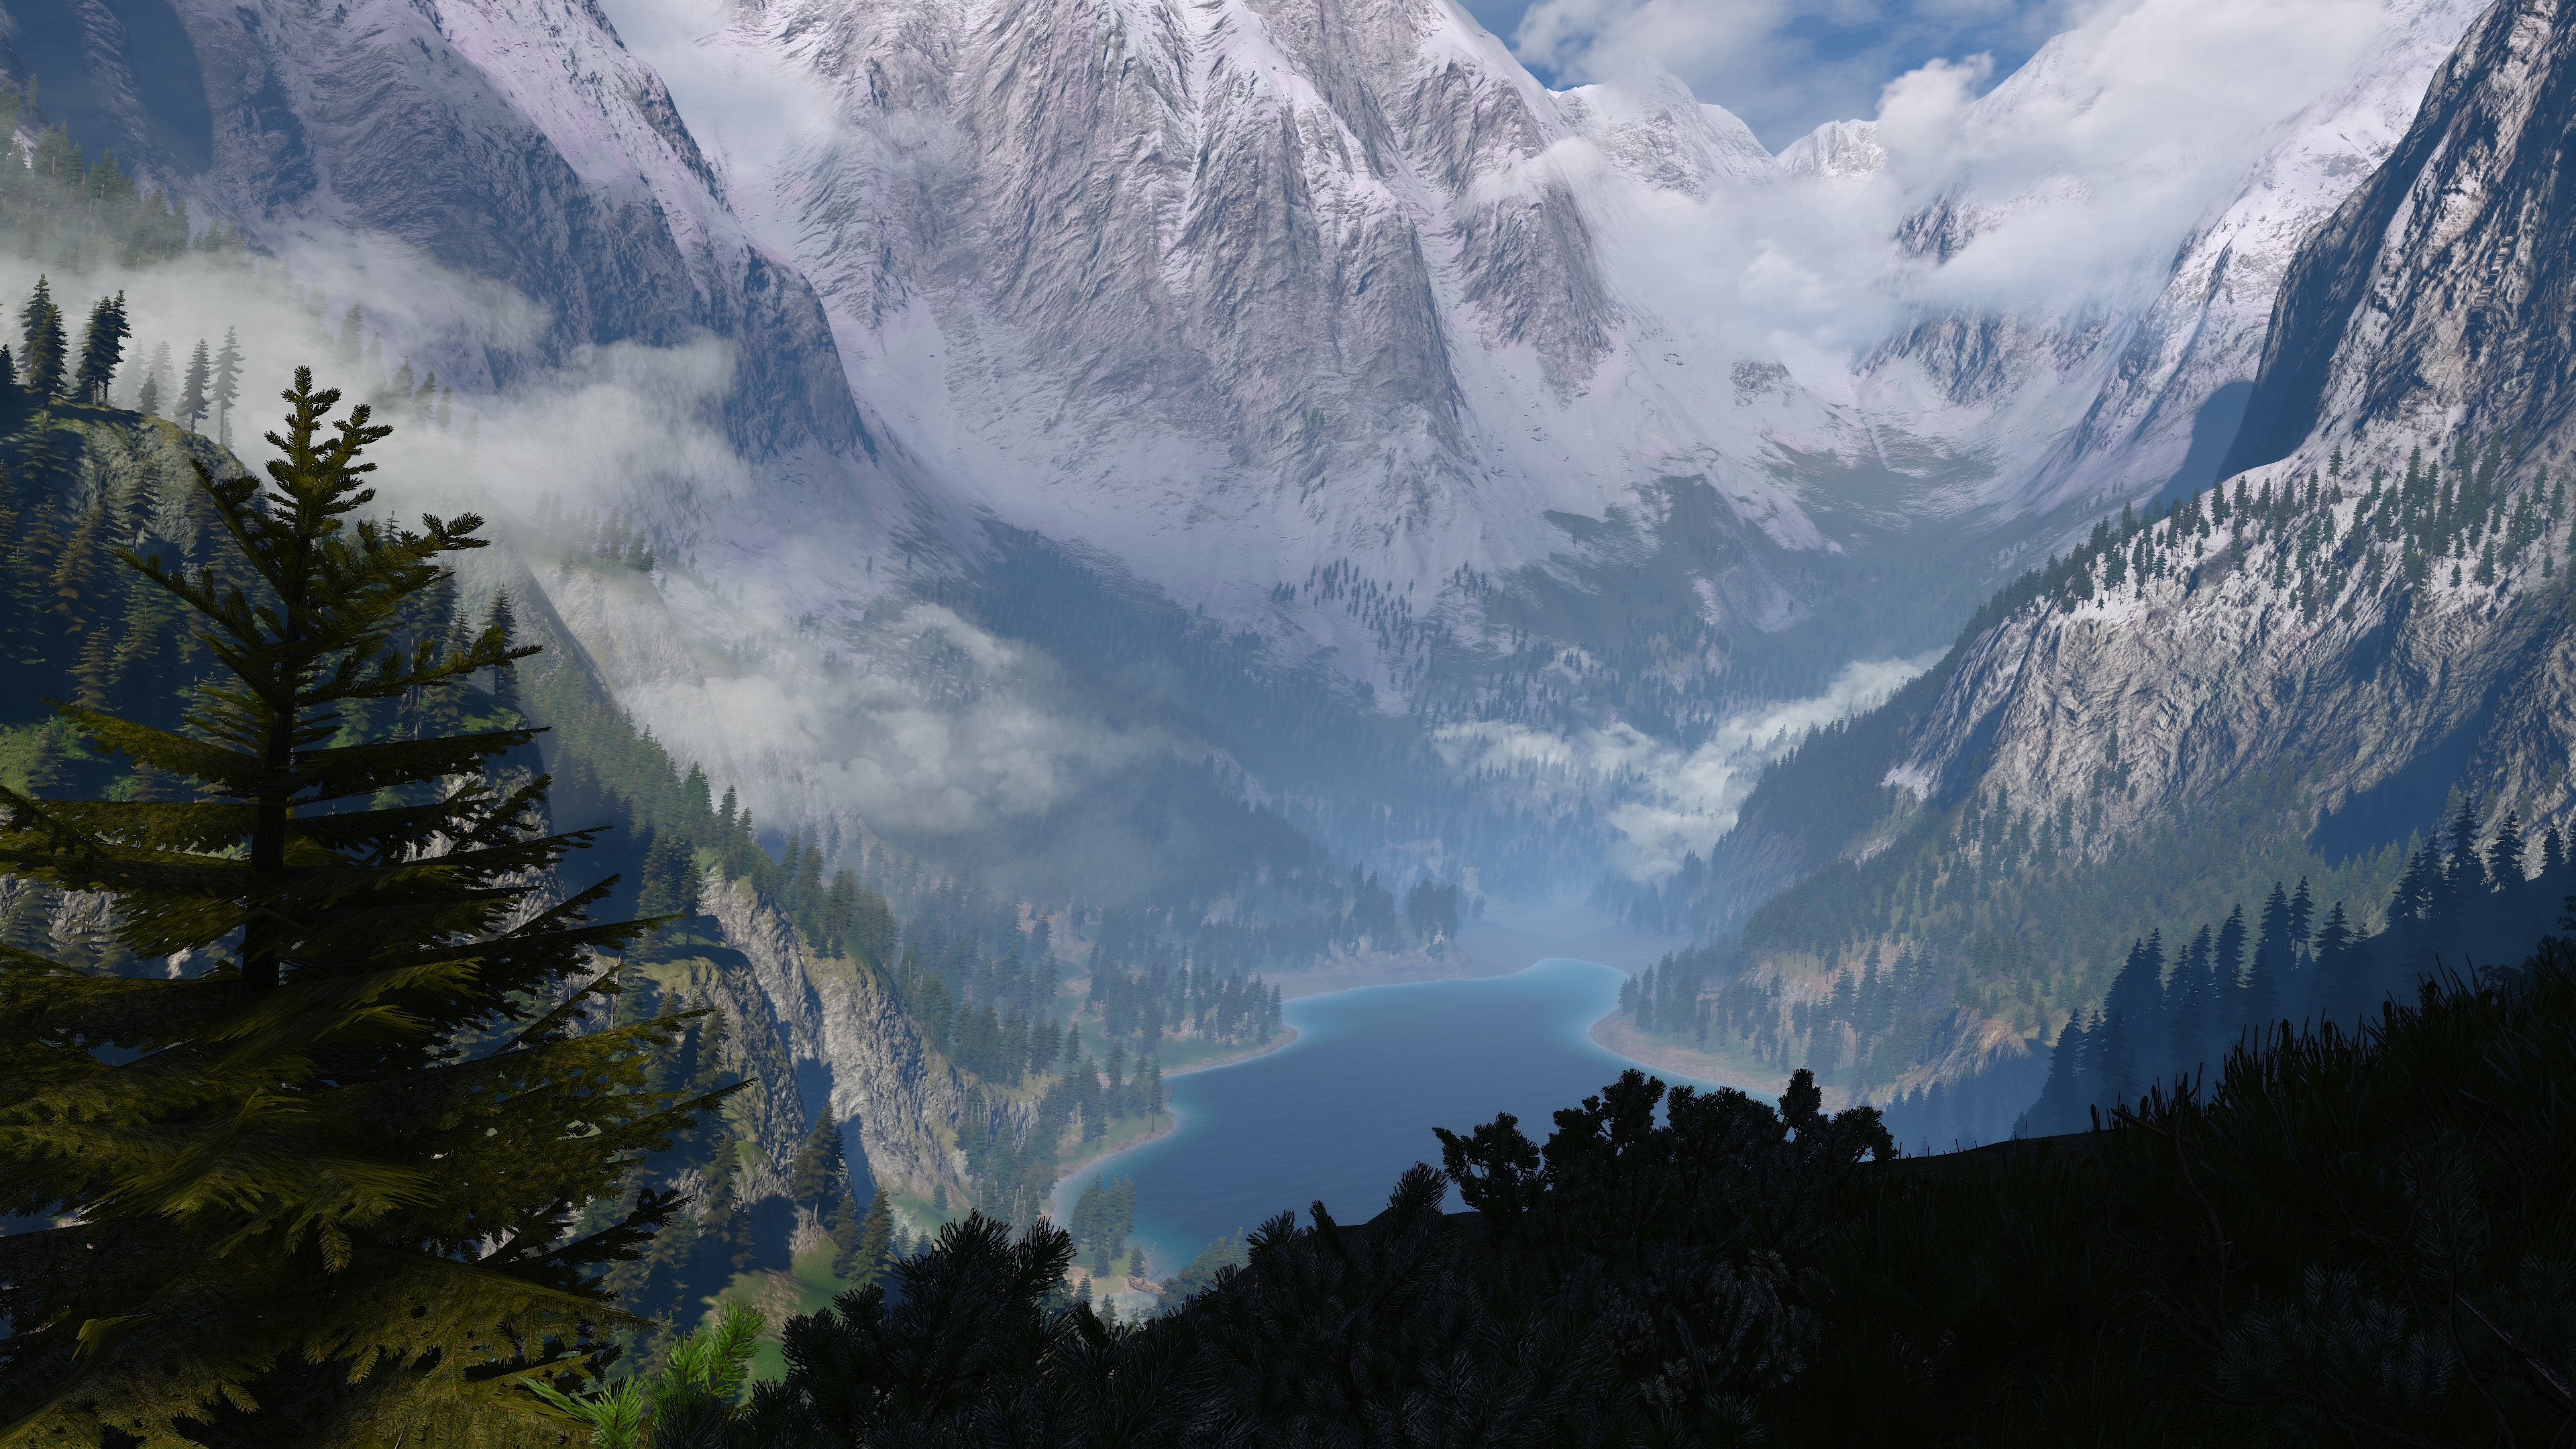 General 3840x2160 The Witcher 3: Wild Hunt PC gaming screen shot mountains lake clouds rocks valley video game art water video games trees snow landscape CGI snowy mountain nature